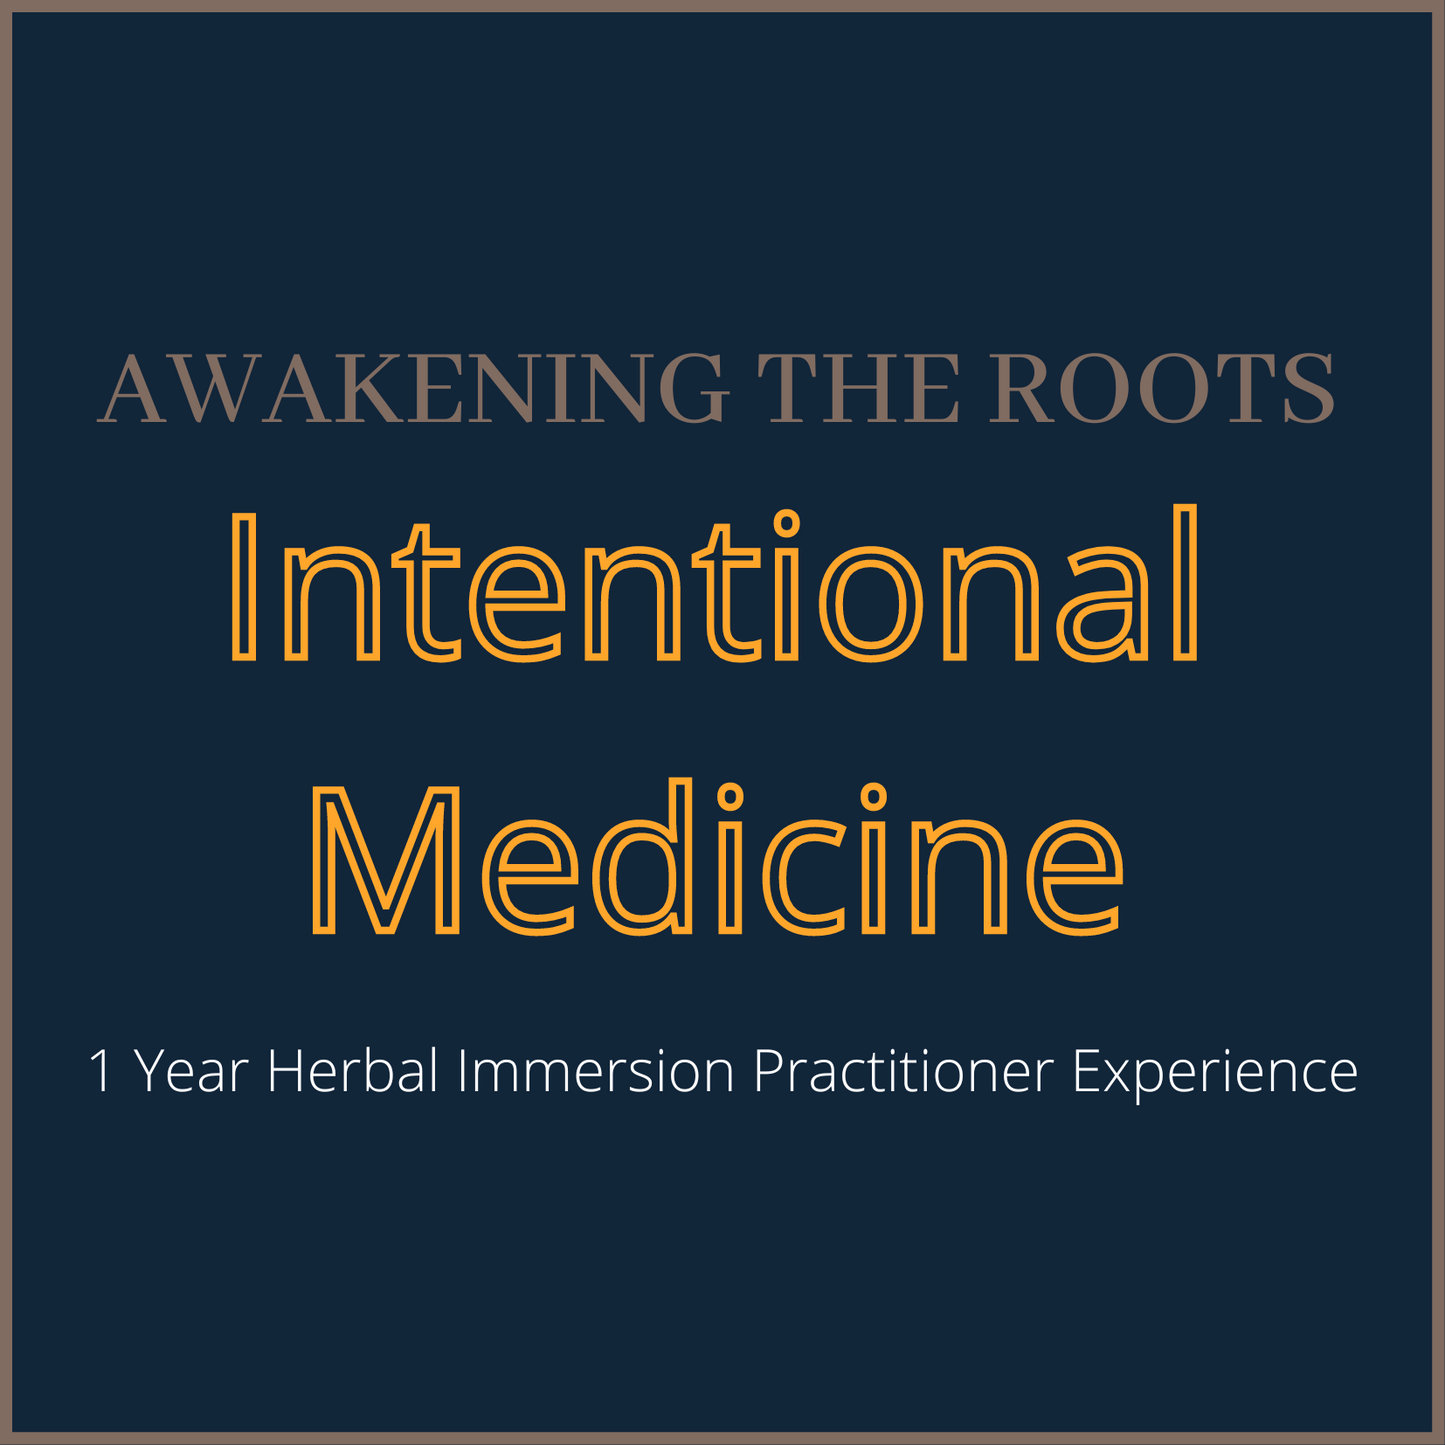 Awakening the Roots - Intentional Medicine Community Herbalist Course